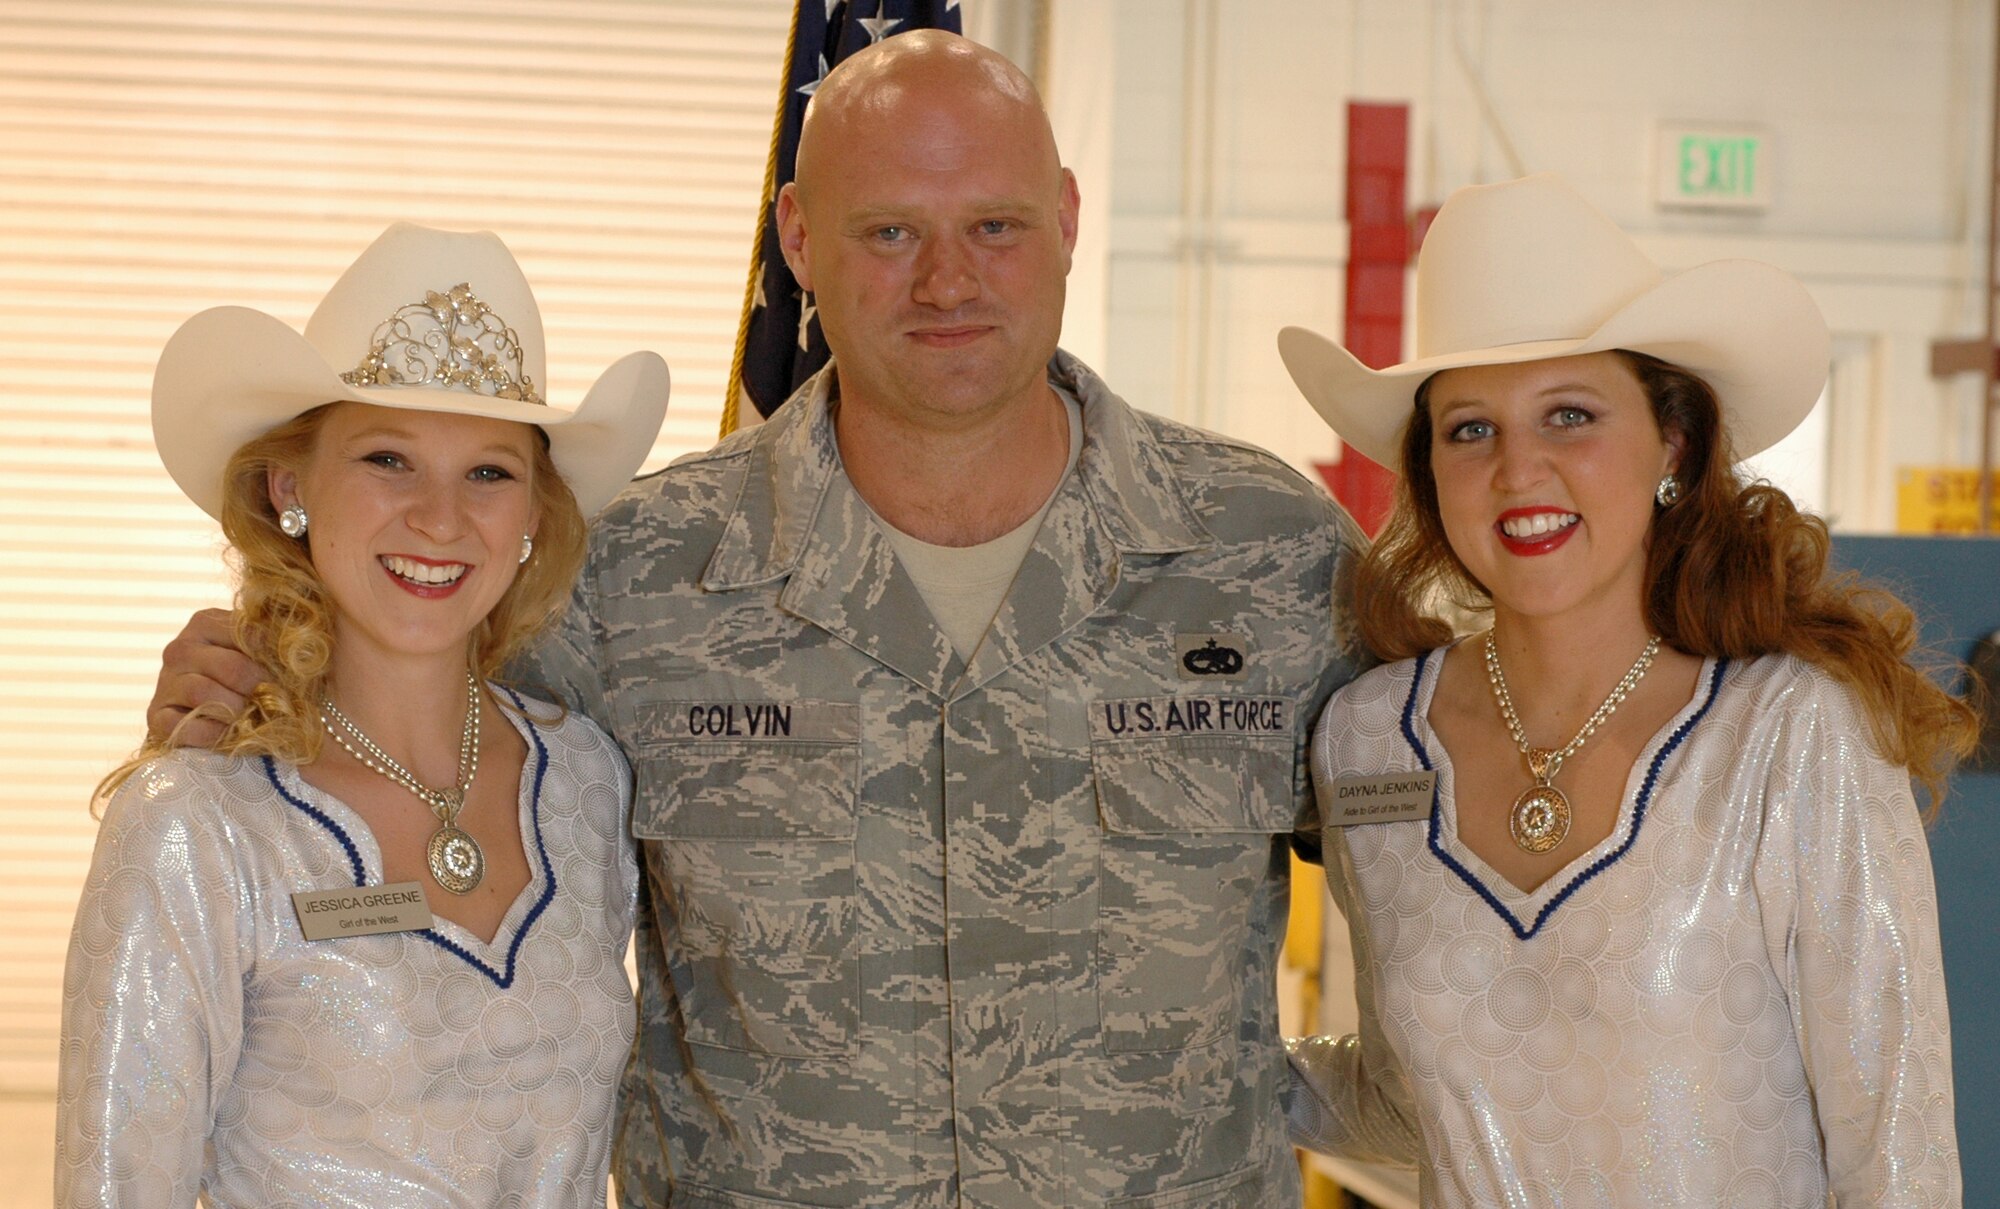 Girls of the West ladies Jessica Greene (left) and Dayna Jenkins stop for a photo with Tech. Sgt. Kennon Colvin after he re-enlisted with the Air Force July 1 at Peterson Air Force Base, Colo. Both Miss Greene, the Girl of the West, and her aide, Miss Jenkins, received an up-close look at the 302nd Airlift Wing's primary mission of tactical airlift and airdrop and experienced the re-enlistment ceremony for the 52nd Airlift Squadron member. Sergeant Colvin is a C-130 crew chief assigned to the 52nd AS, an Active Duty C-130 unit associated with the 302nd AW. The 302nd AW is an AF Reserve-assigned unit also charged with mission of aerial firefighting using the Modular Airborne Firefighting System. For more information on the Girls of the West, visit www.coloradospringsrodeo.com. (U.S. Air Force photo/Staff Sgt. Stephen J. Collier)